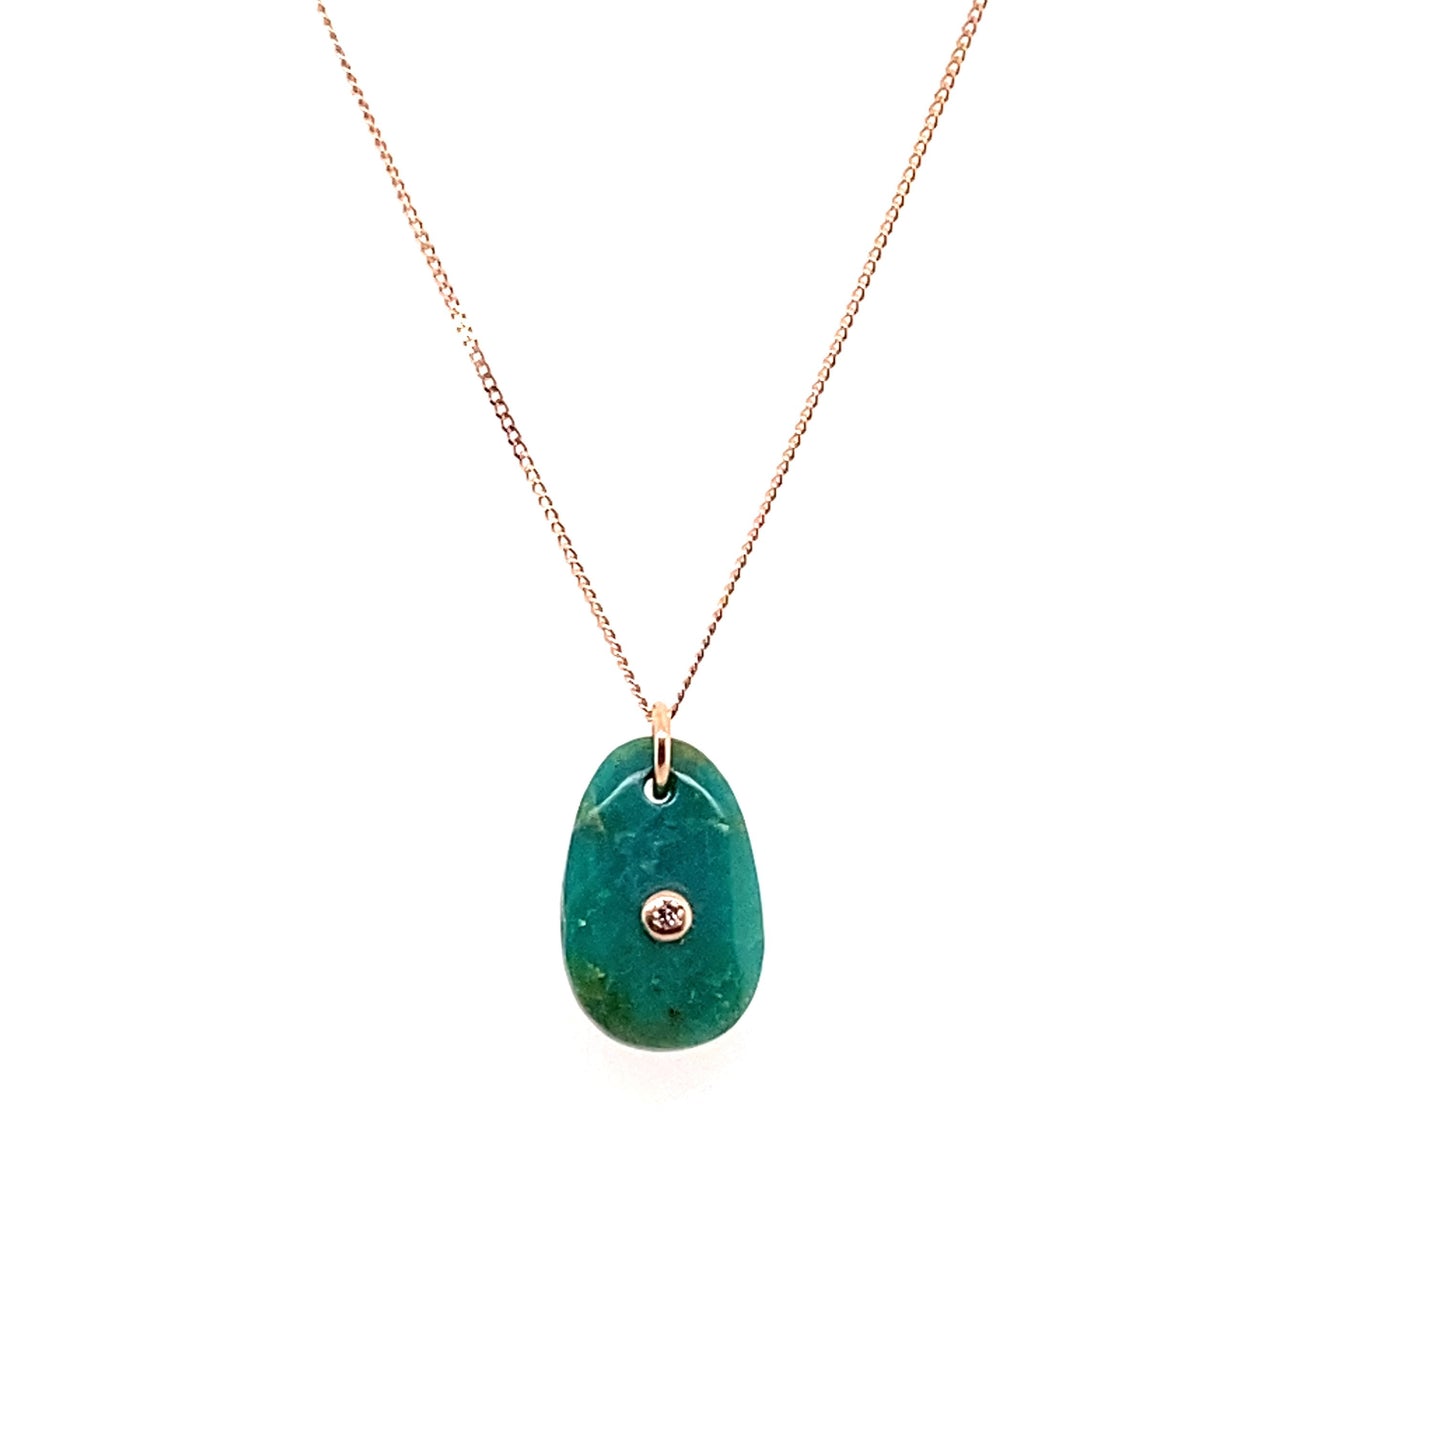 Pascale Monvoisin Turquoise Orso N°1 Necklace